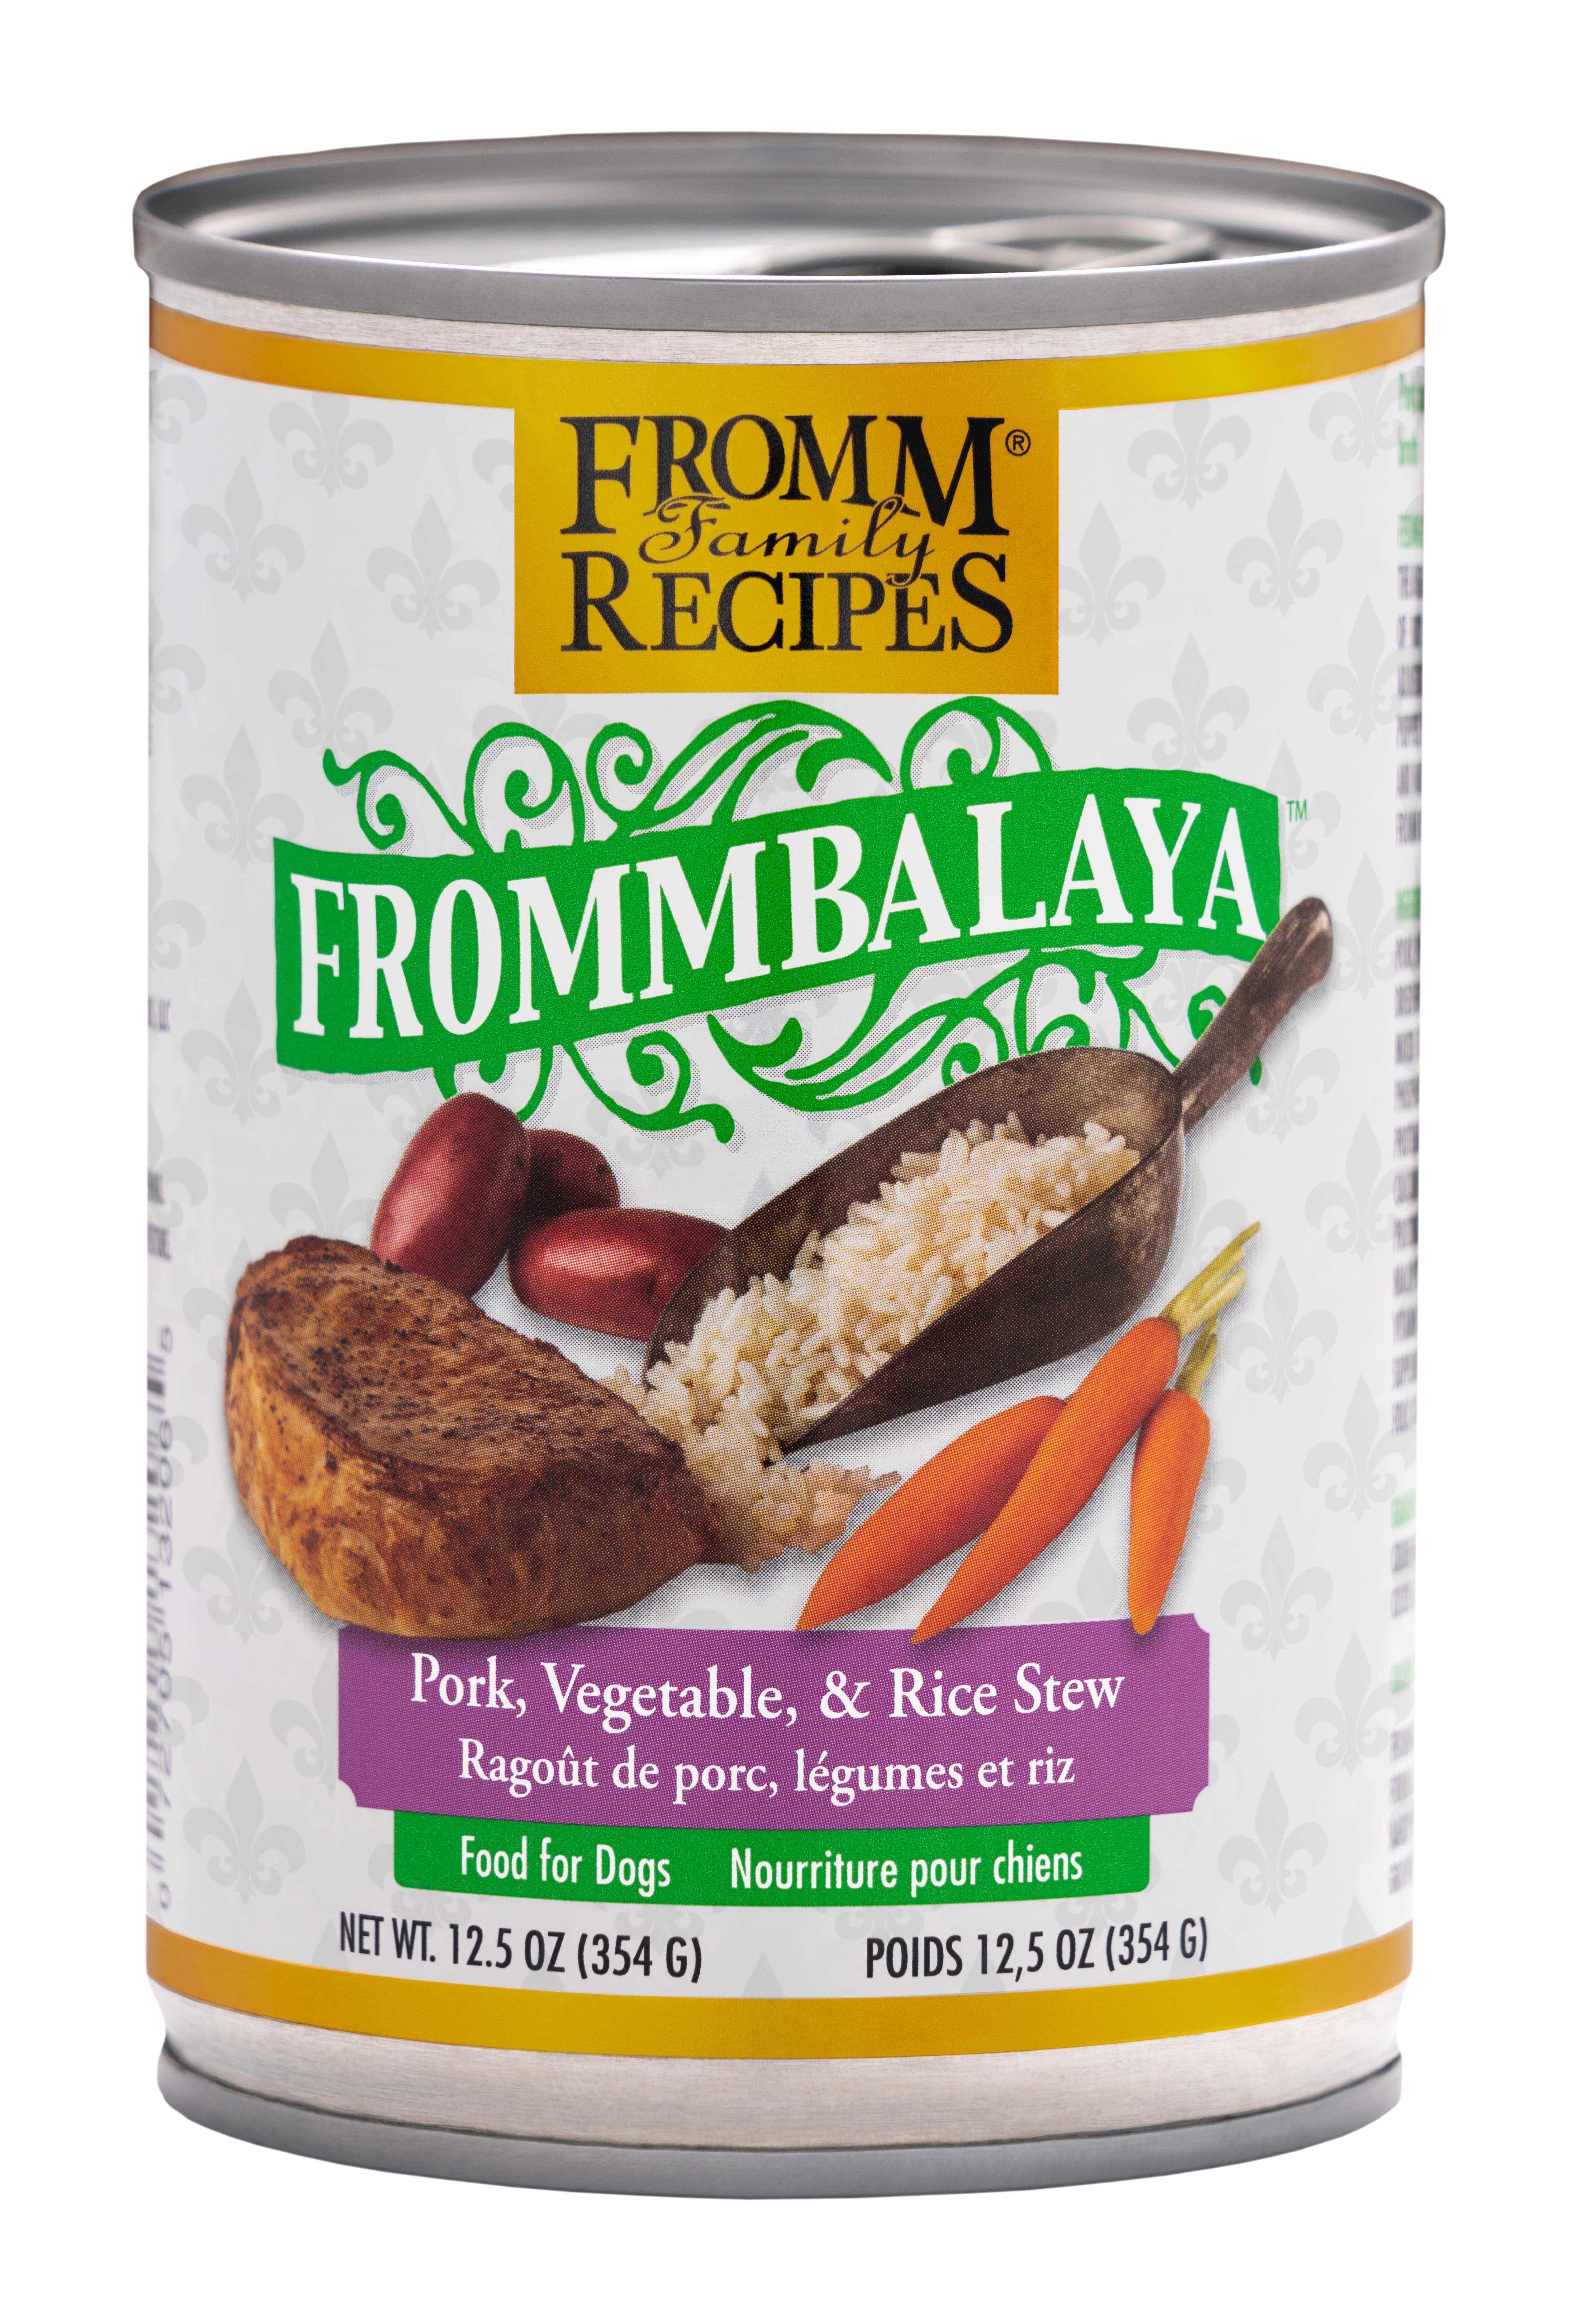 Fromm Frommbalaya Pork, Vegetable, Rice Stew Canned Dog Food - 12.5 oz, Case of 12